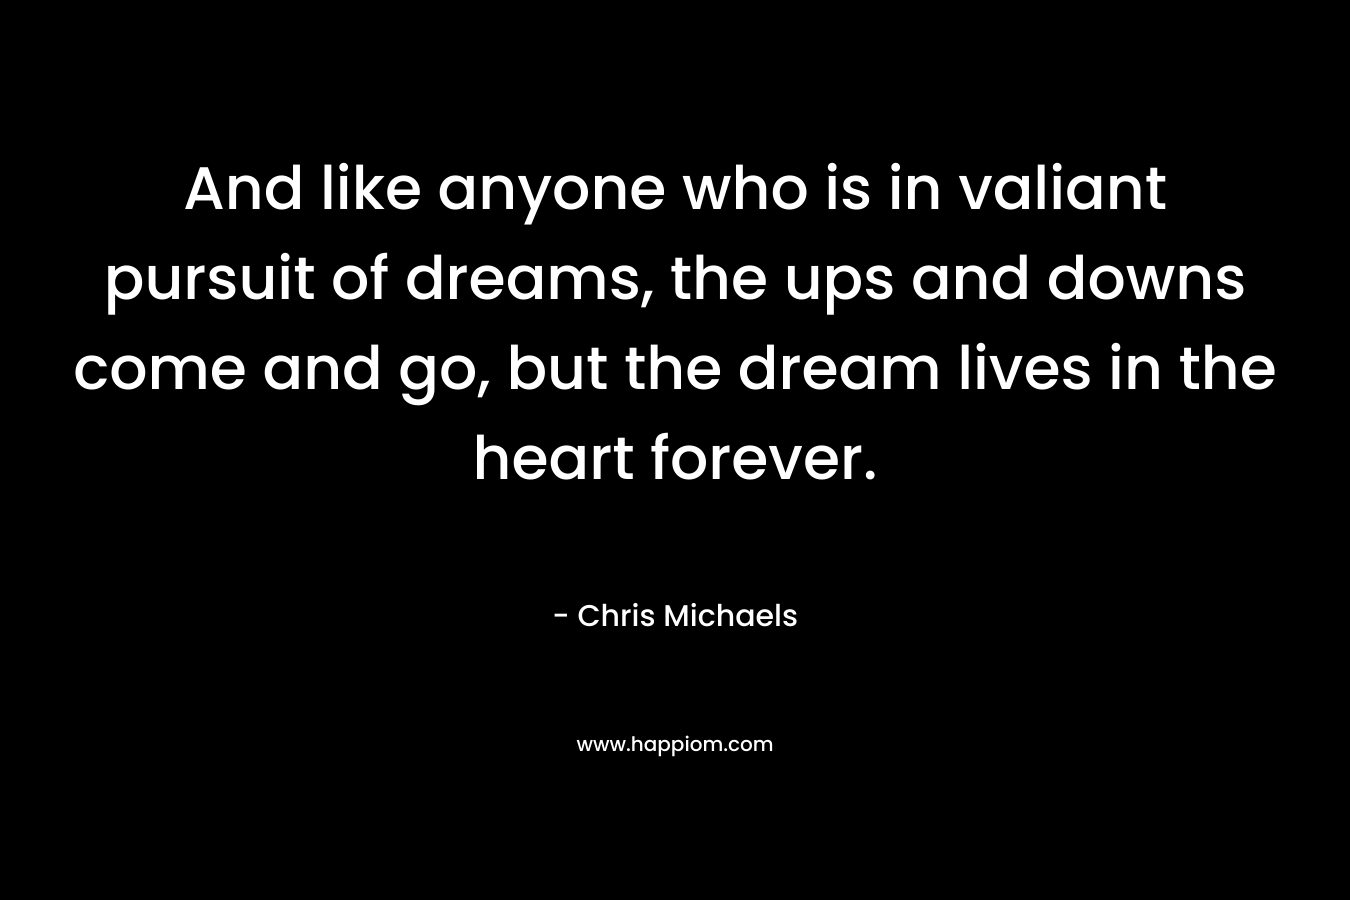 And like anyone who is in valiant pursuit of dreams, the ups and downs come and go, but the dream lives in the heart forever. – Chris Michaels